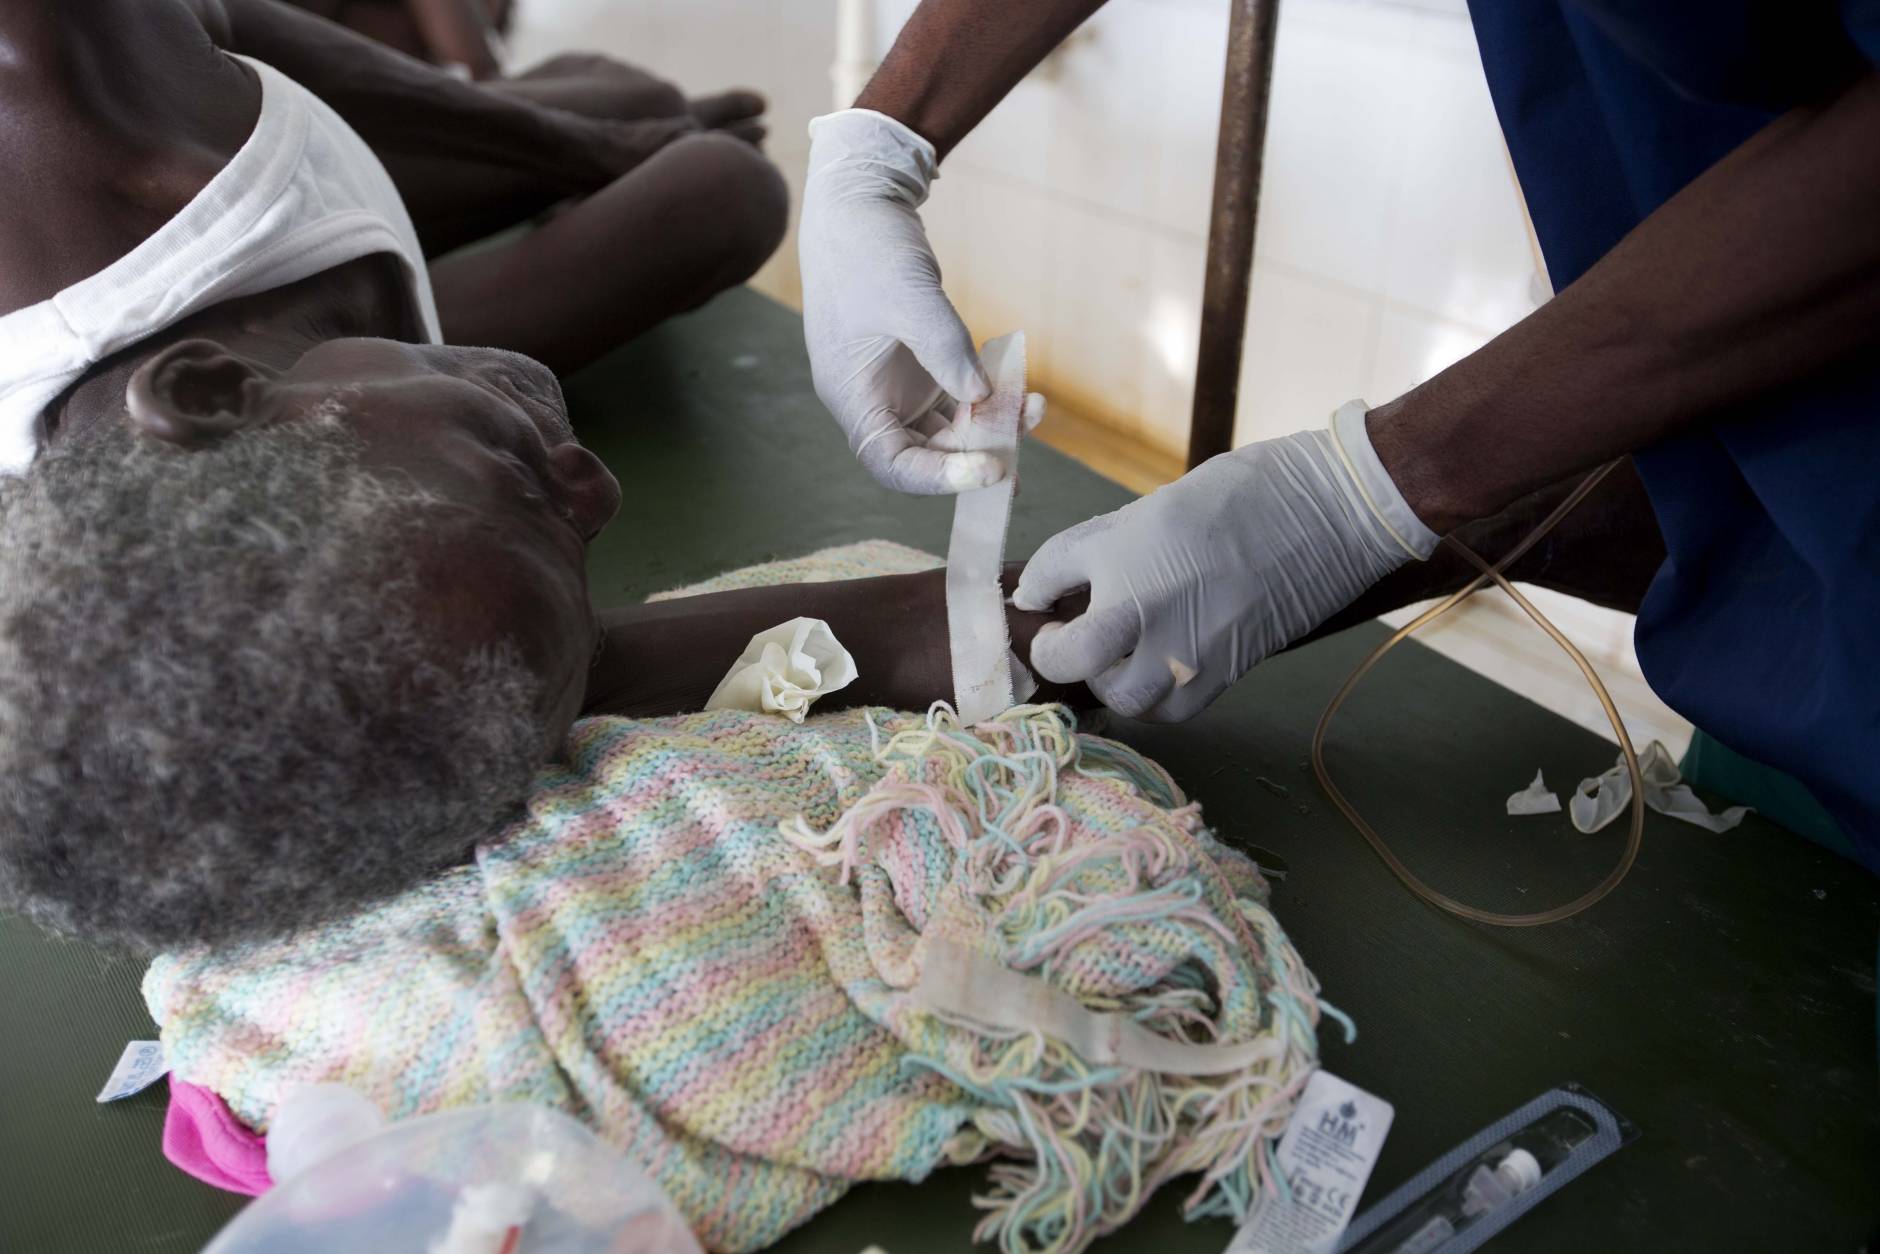 A doctor treats a cholera patient at a cholera center in Anse D'Hainault, Haiti, Tuesday, Oct. 11, 2016. The U.N. said Hurricane Matthew has increased the risk of a "renewed spike" in the number of cholera cases. (AP Photo/Dieu Nalio Chery)